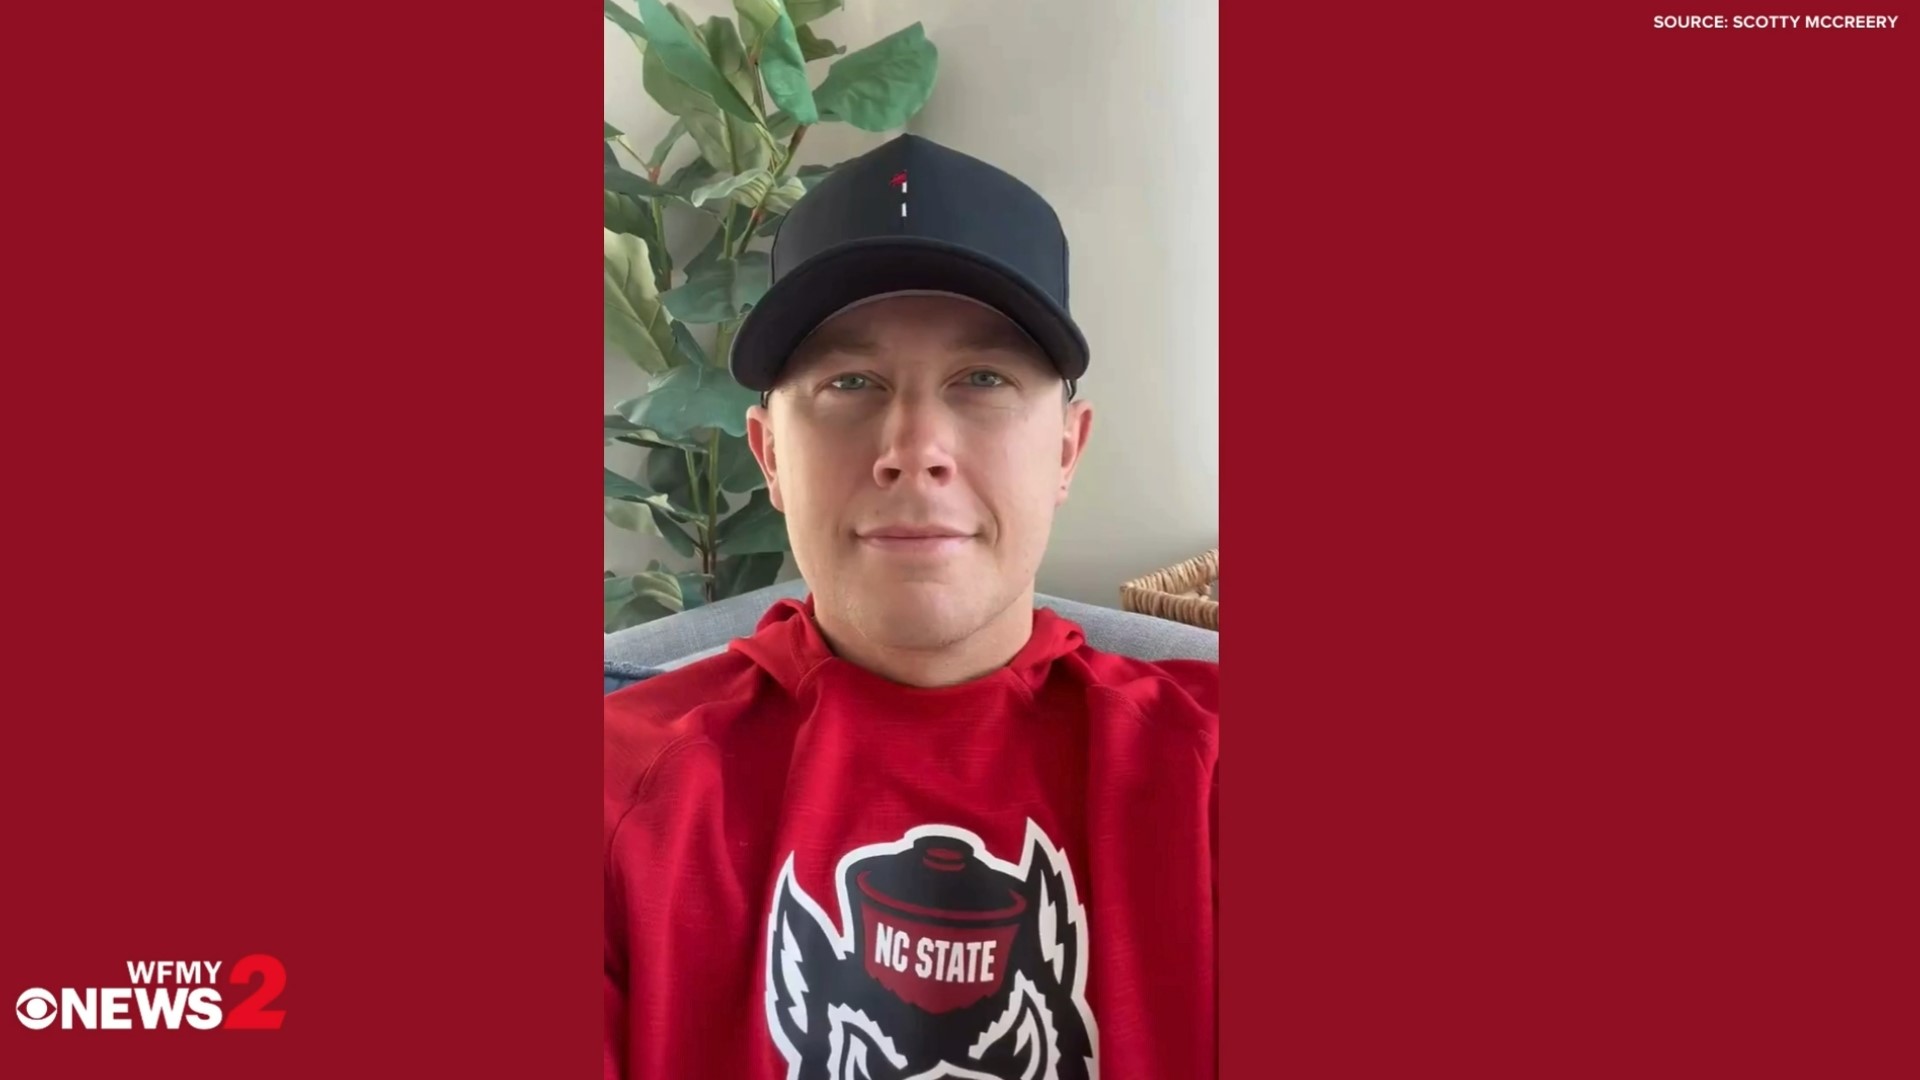 Scotty McCreery, who went to NC State, has a concert in San Diego the same day the Wolfpack plays in the Final Four.